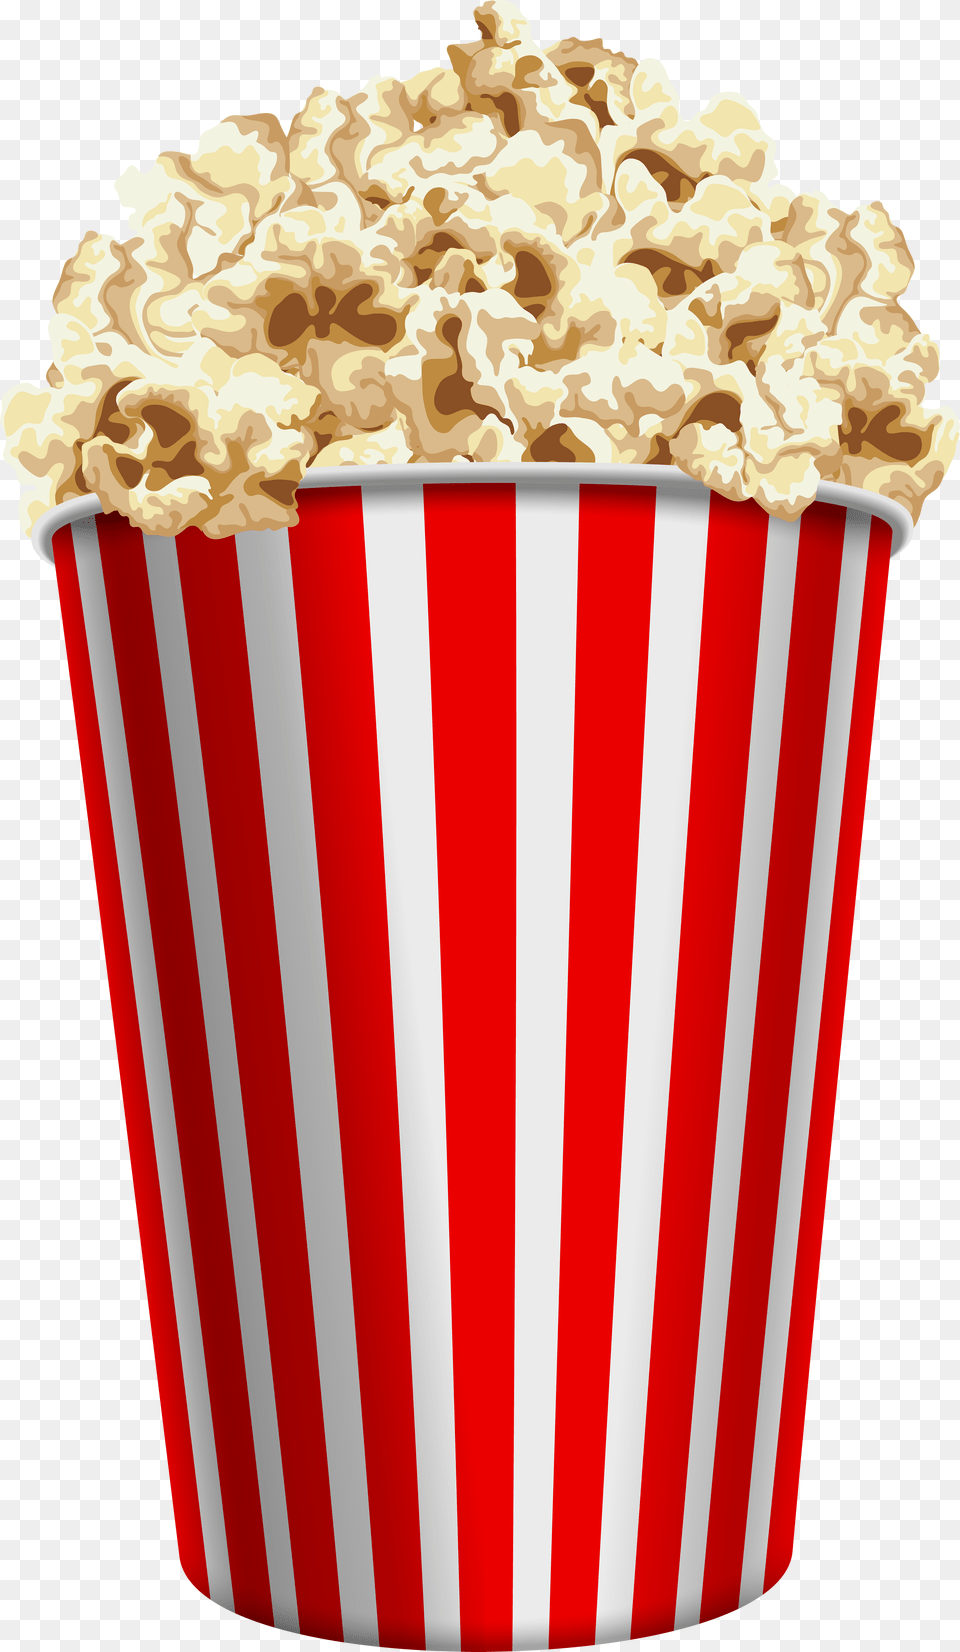 Clip Art Gallery Yopriceville Popcorn, Food, Snack Png Image